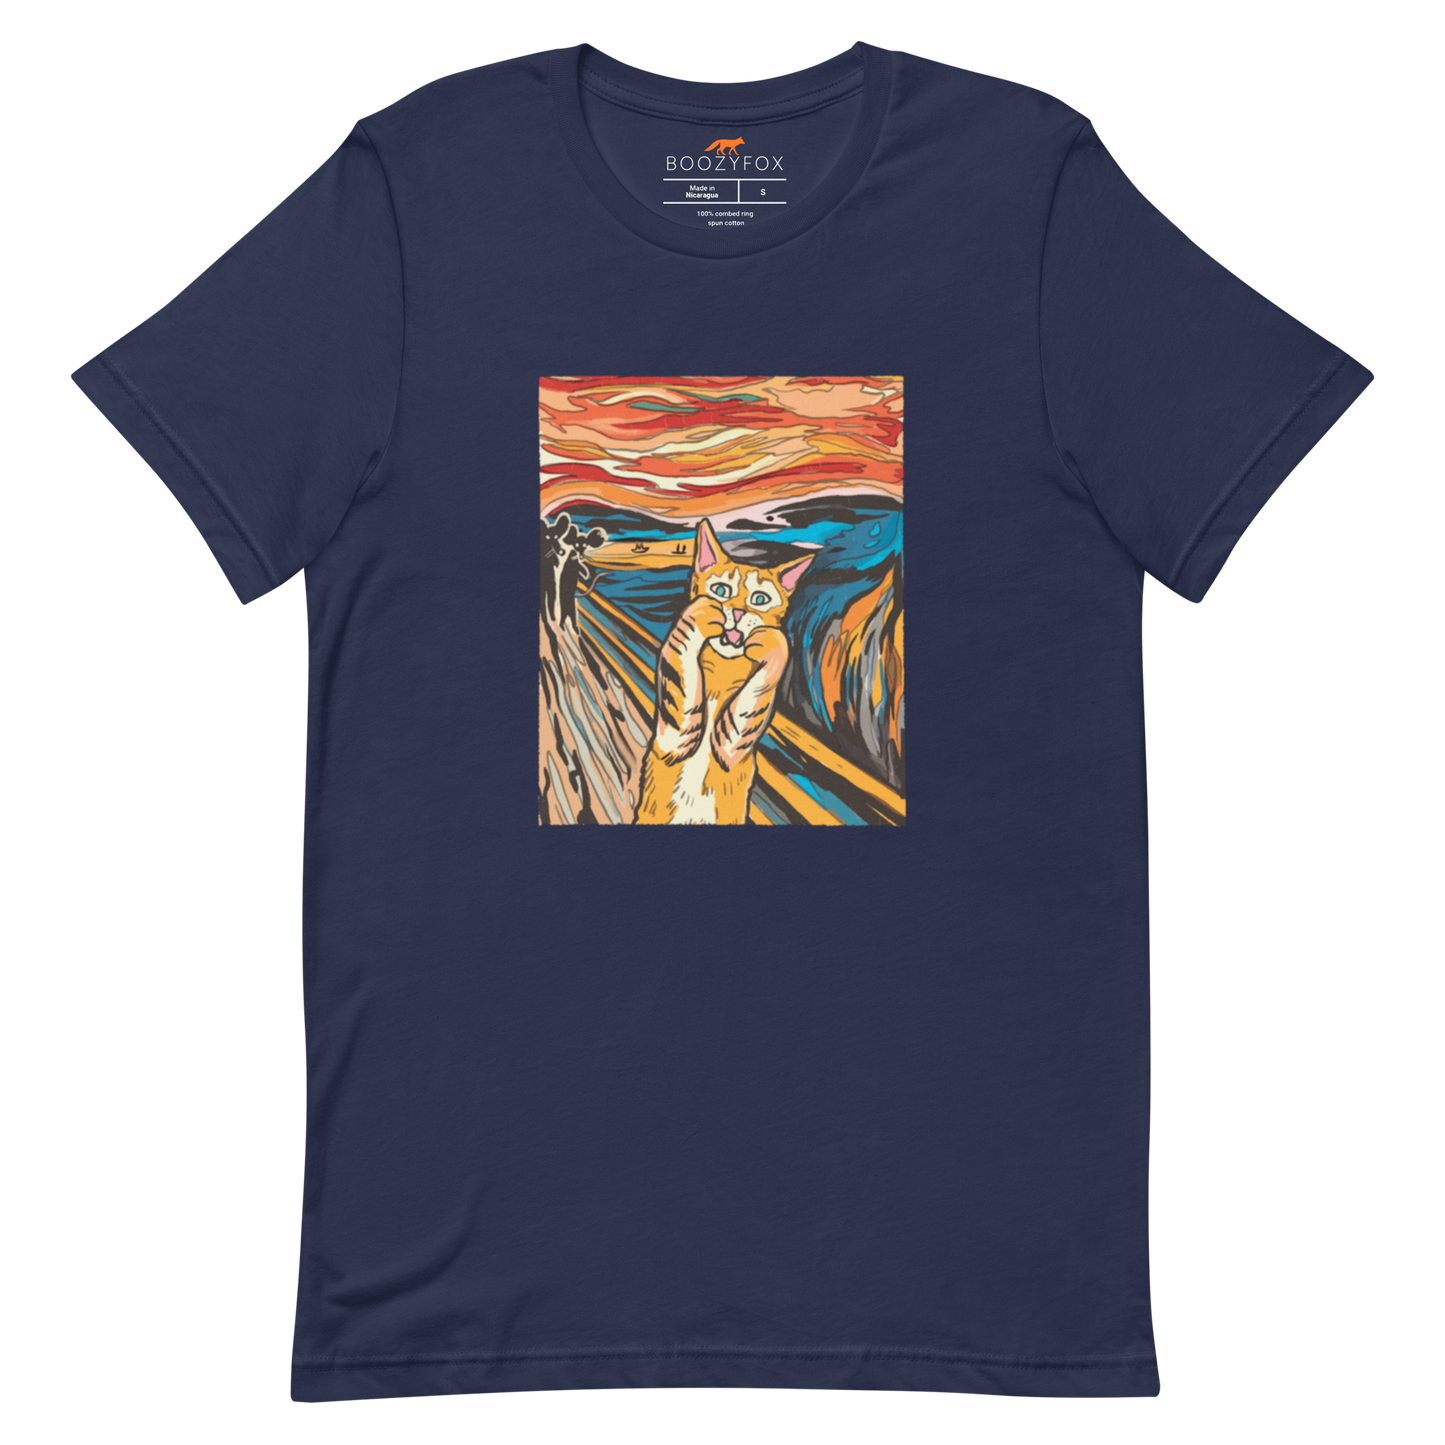 Navy Premium Screaming Cat T-Shirt showcasing iconic The Screaming Cat graphic on the chest - Funny Graphic Cat Tees - Boozy Fox